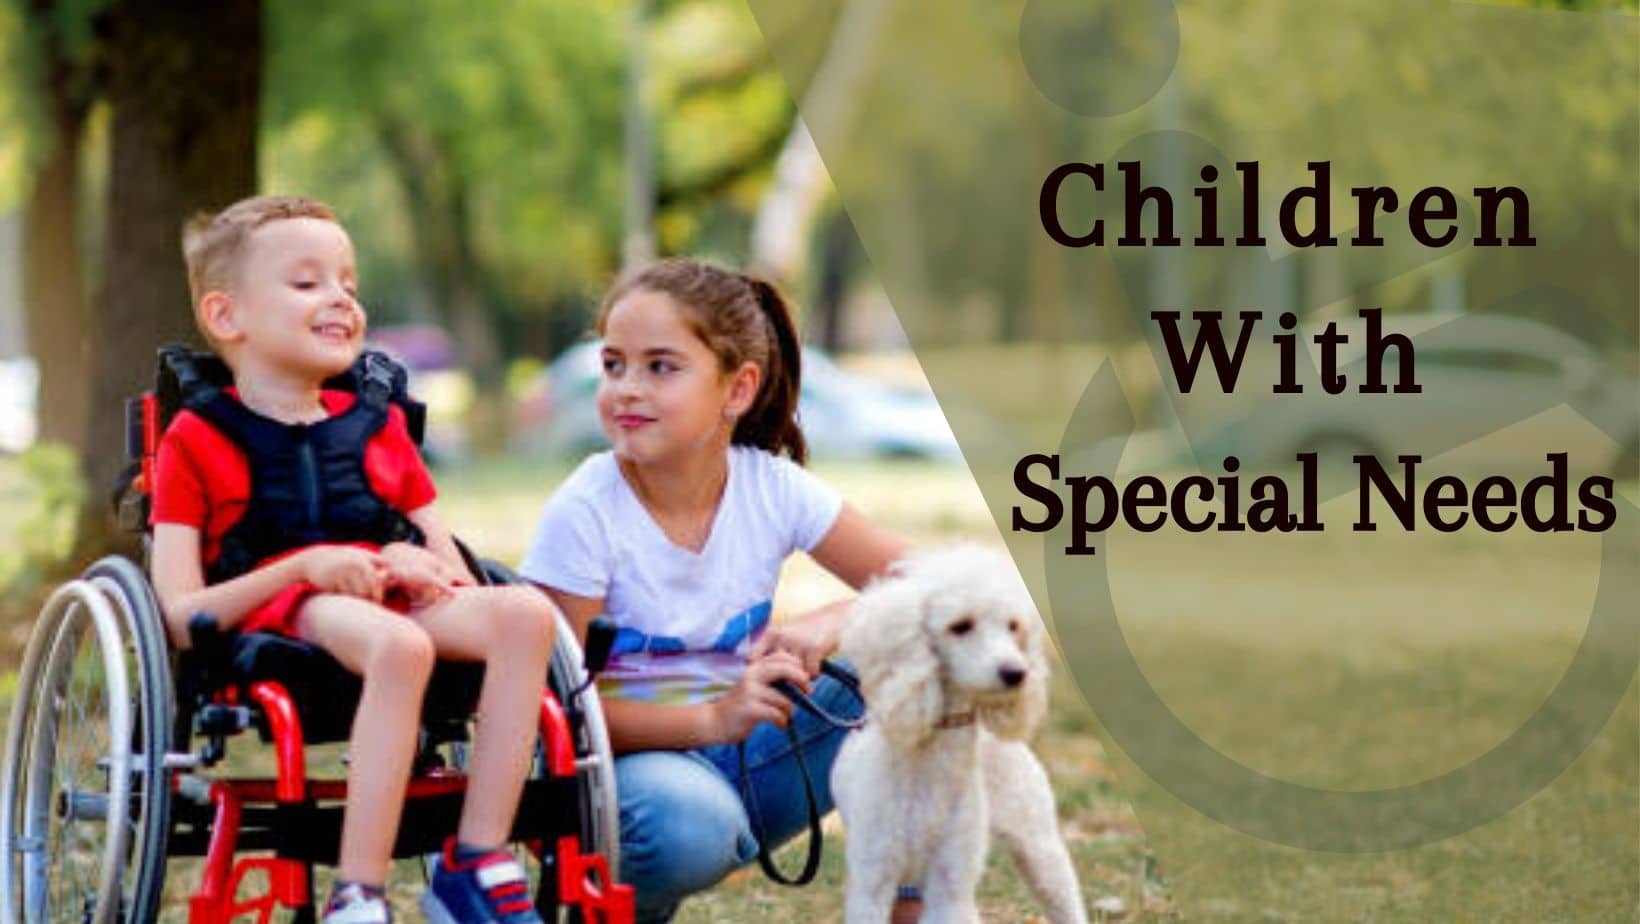 What Makes The Child With Special Needs Special